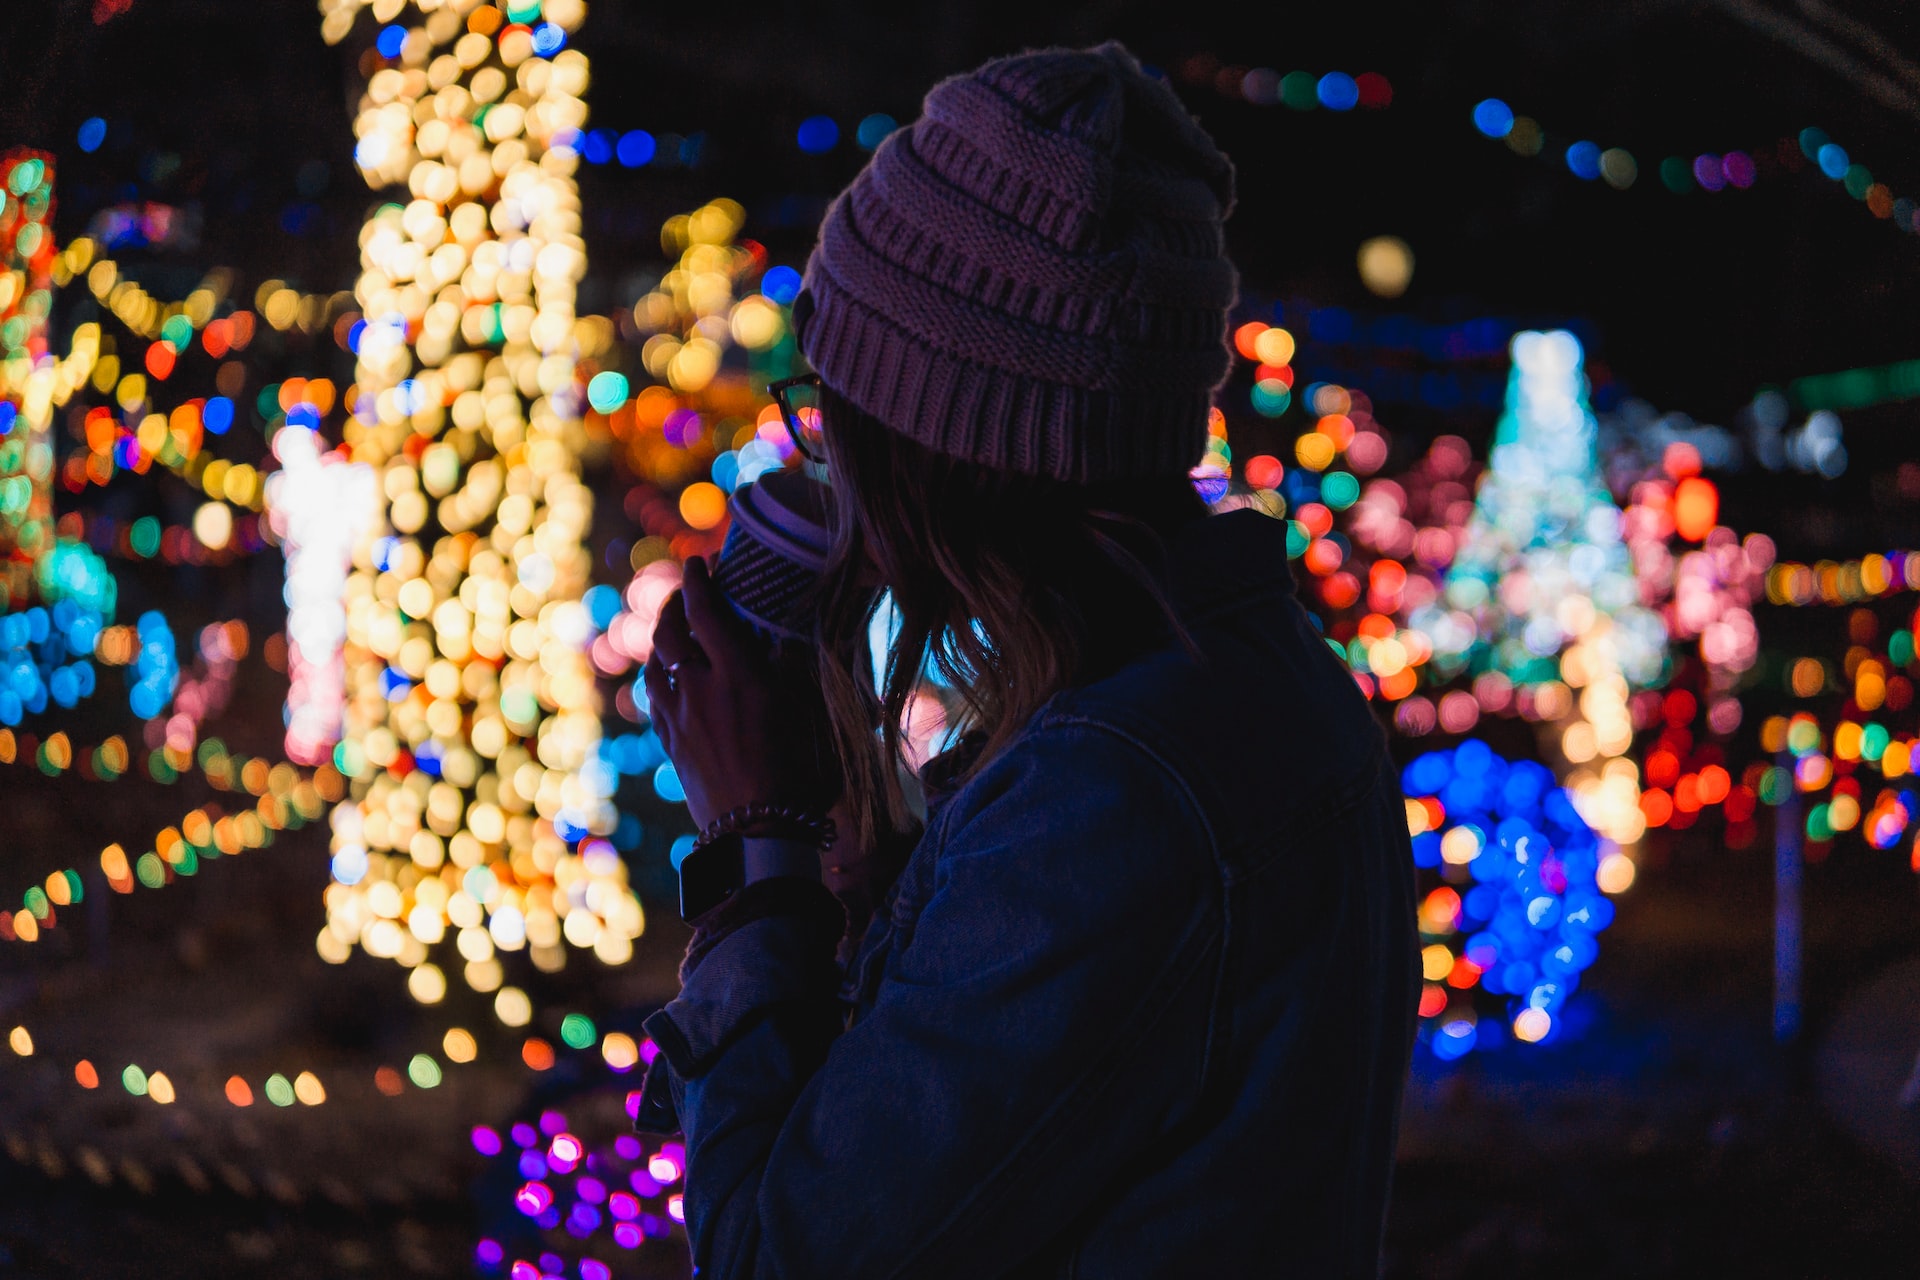 Bokeh photography of a woman looking at Christmas lights behind her.